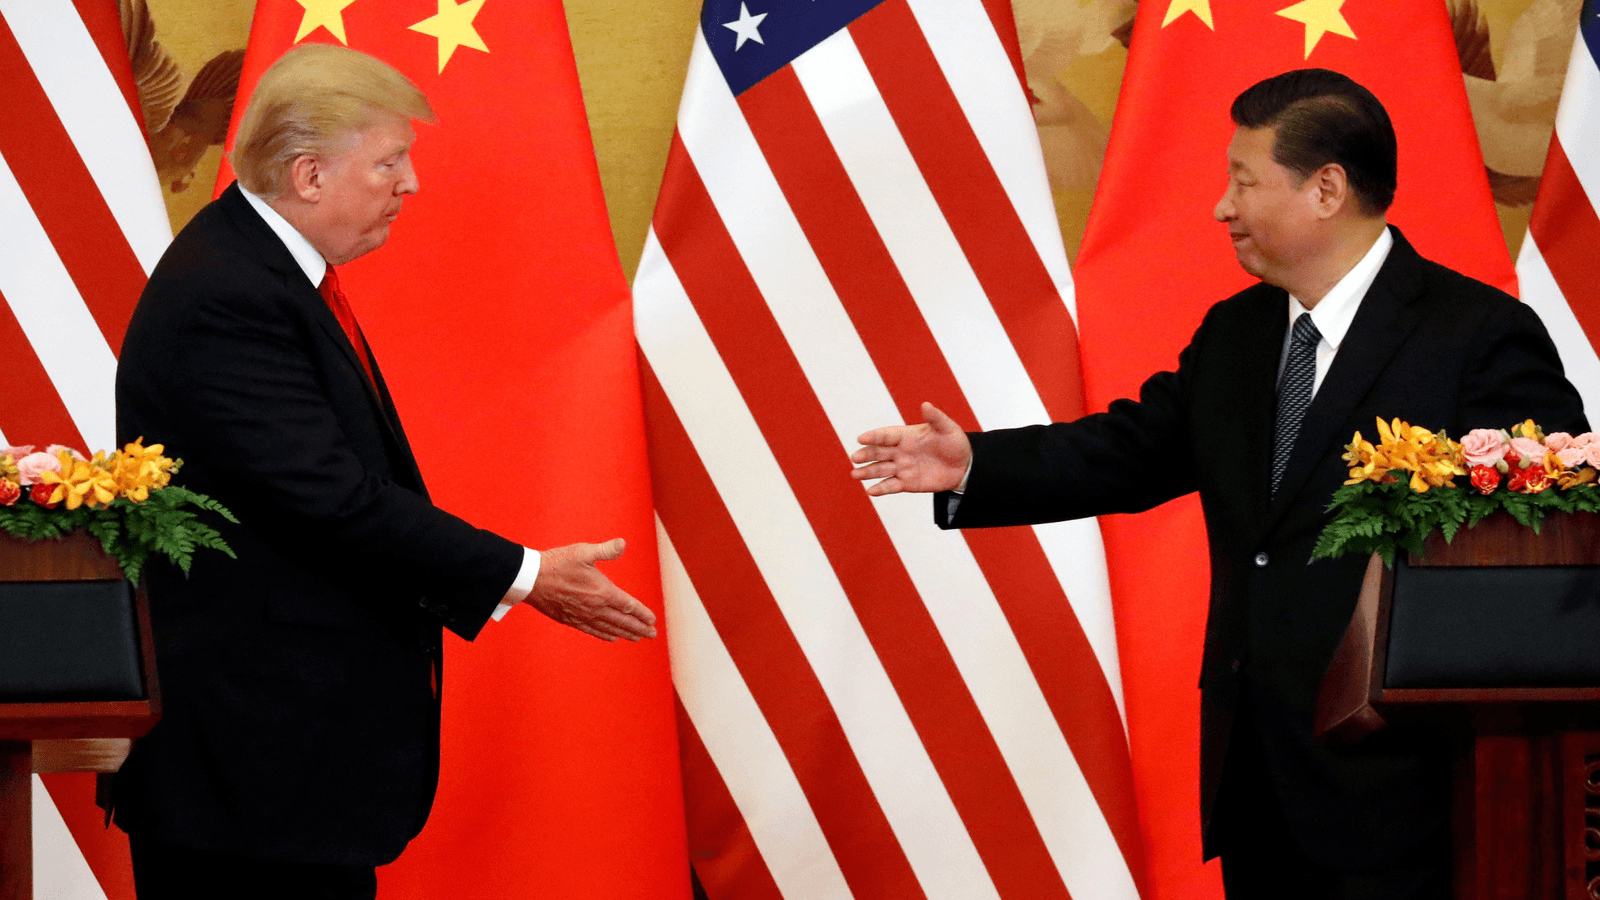 Trump meets with Jinping in China